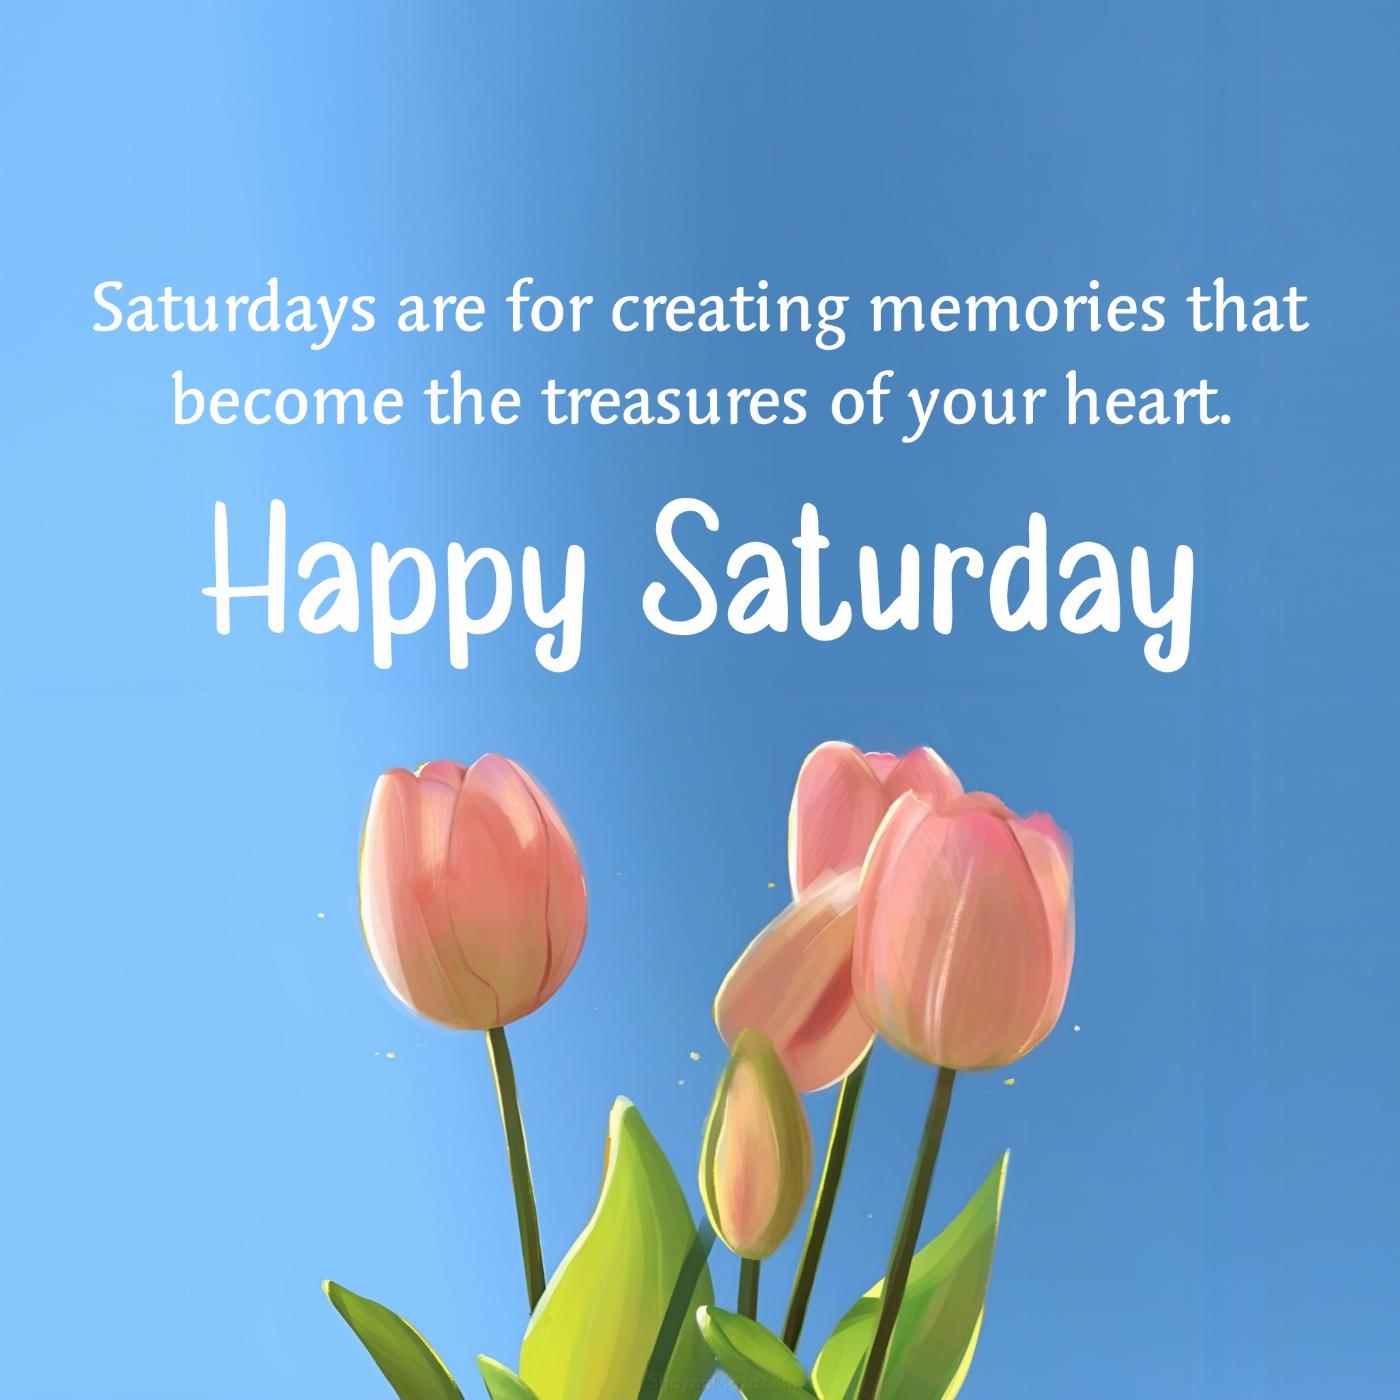 Saturdays are for creating memories that become the treasures